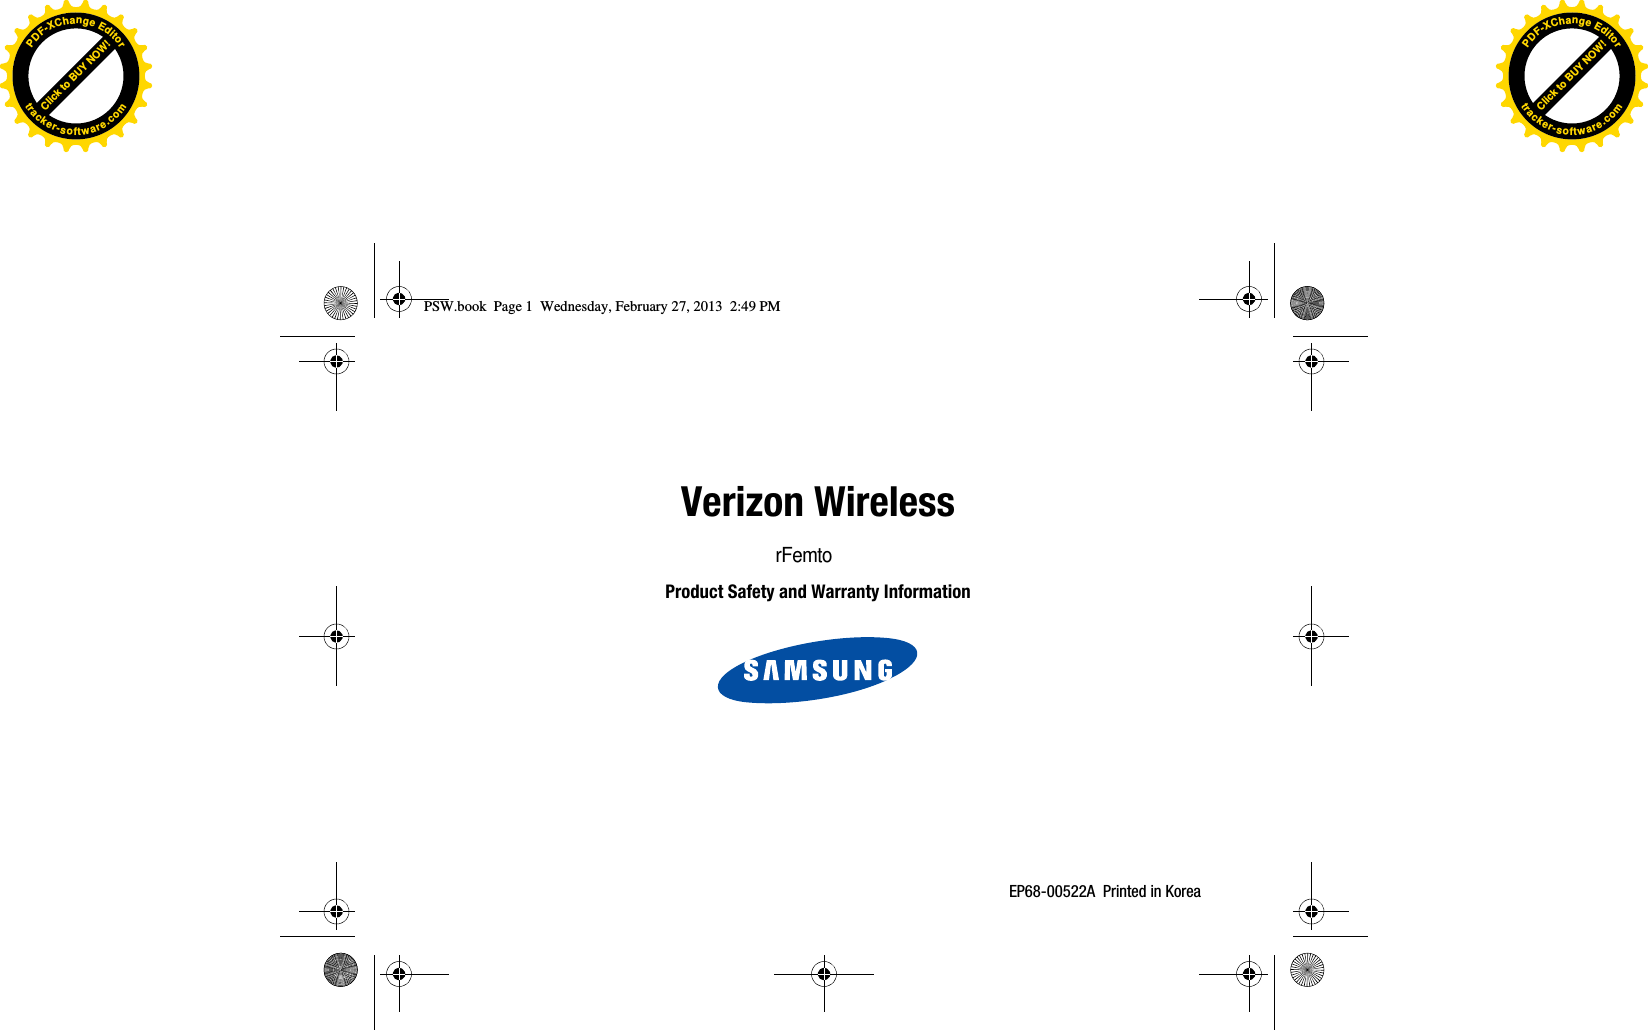 EP68-00522A  Printed in KoreaPSW.book  Page 1  Wednesday, February 27, 2013  2:49 PMVerizon WirelessrFemtoProduct Safety and Warranty InformationClick to BUY NOW!PDF-XChangeEditortracker-software.comClick to BUY NOW!PDF-XChangeEditortracker-software.com